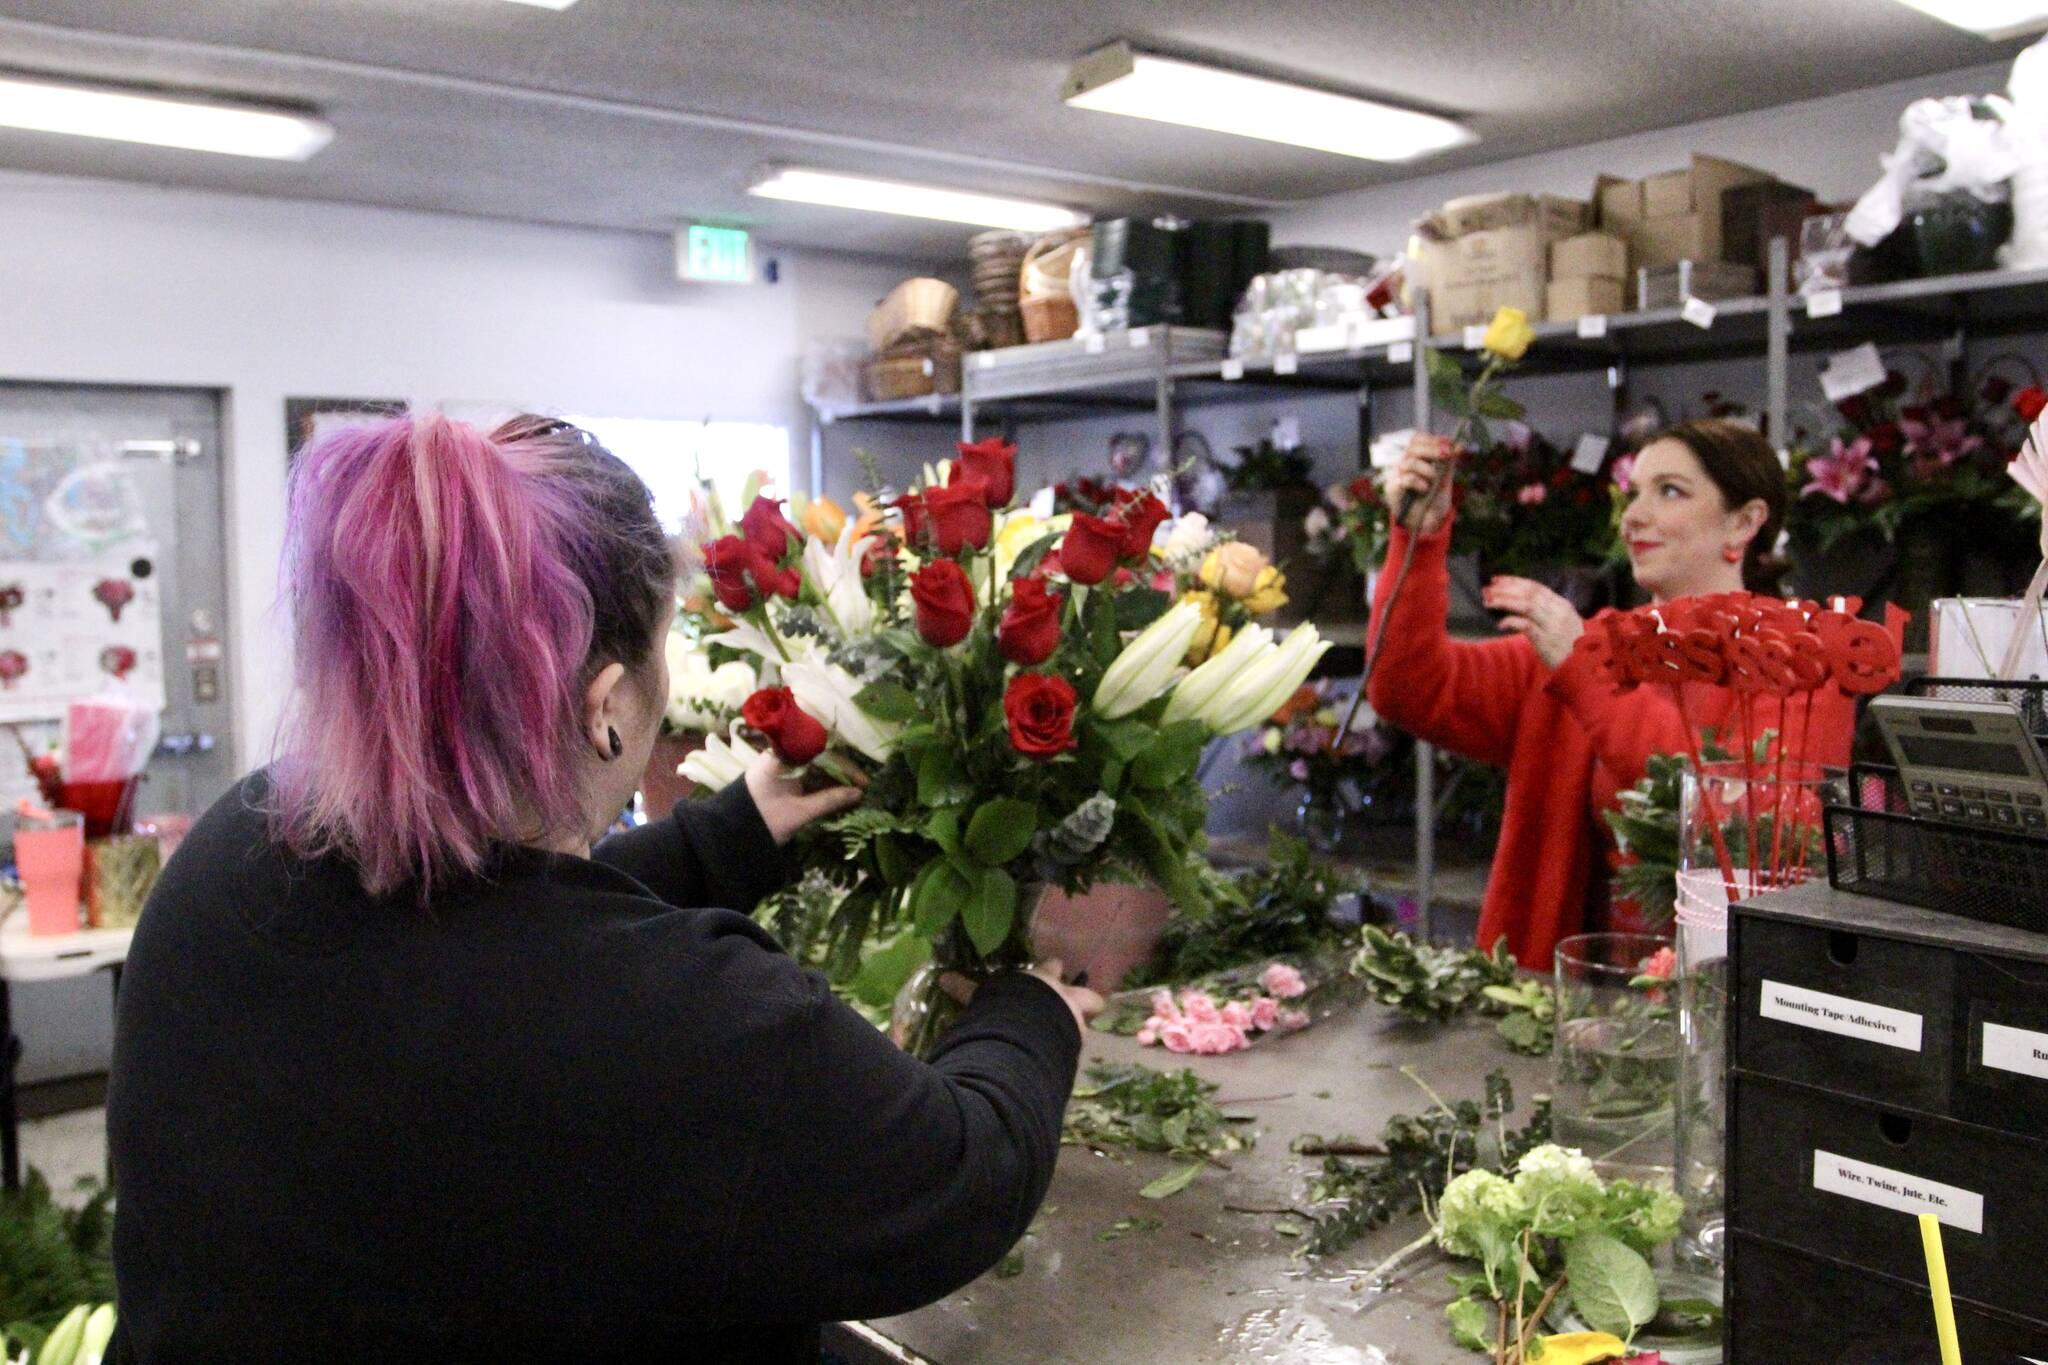 Employees Molly Bricker, left, and Brianna Sterling craft bouquets on Valentine’s Day at the Federal Way flower shop. Olivia Sullivan / the Mirror